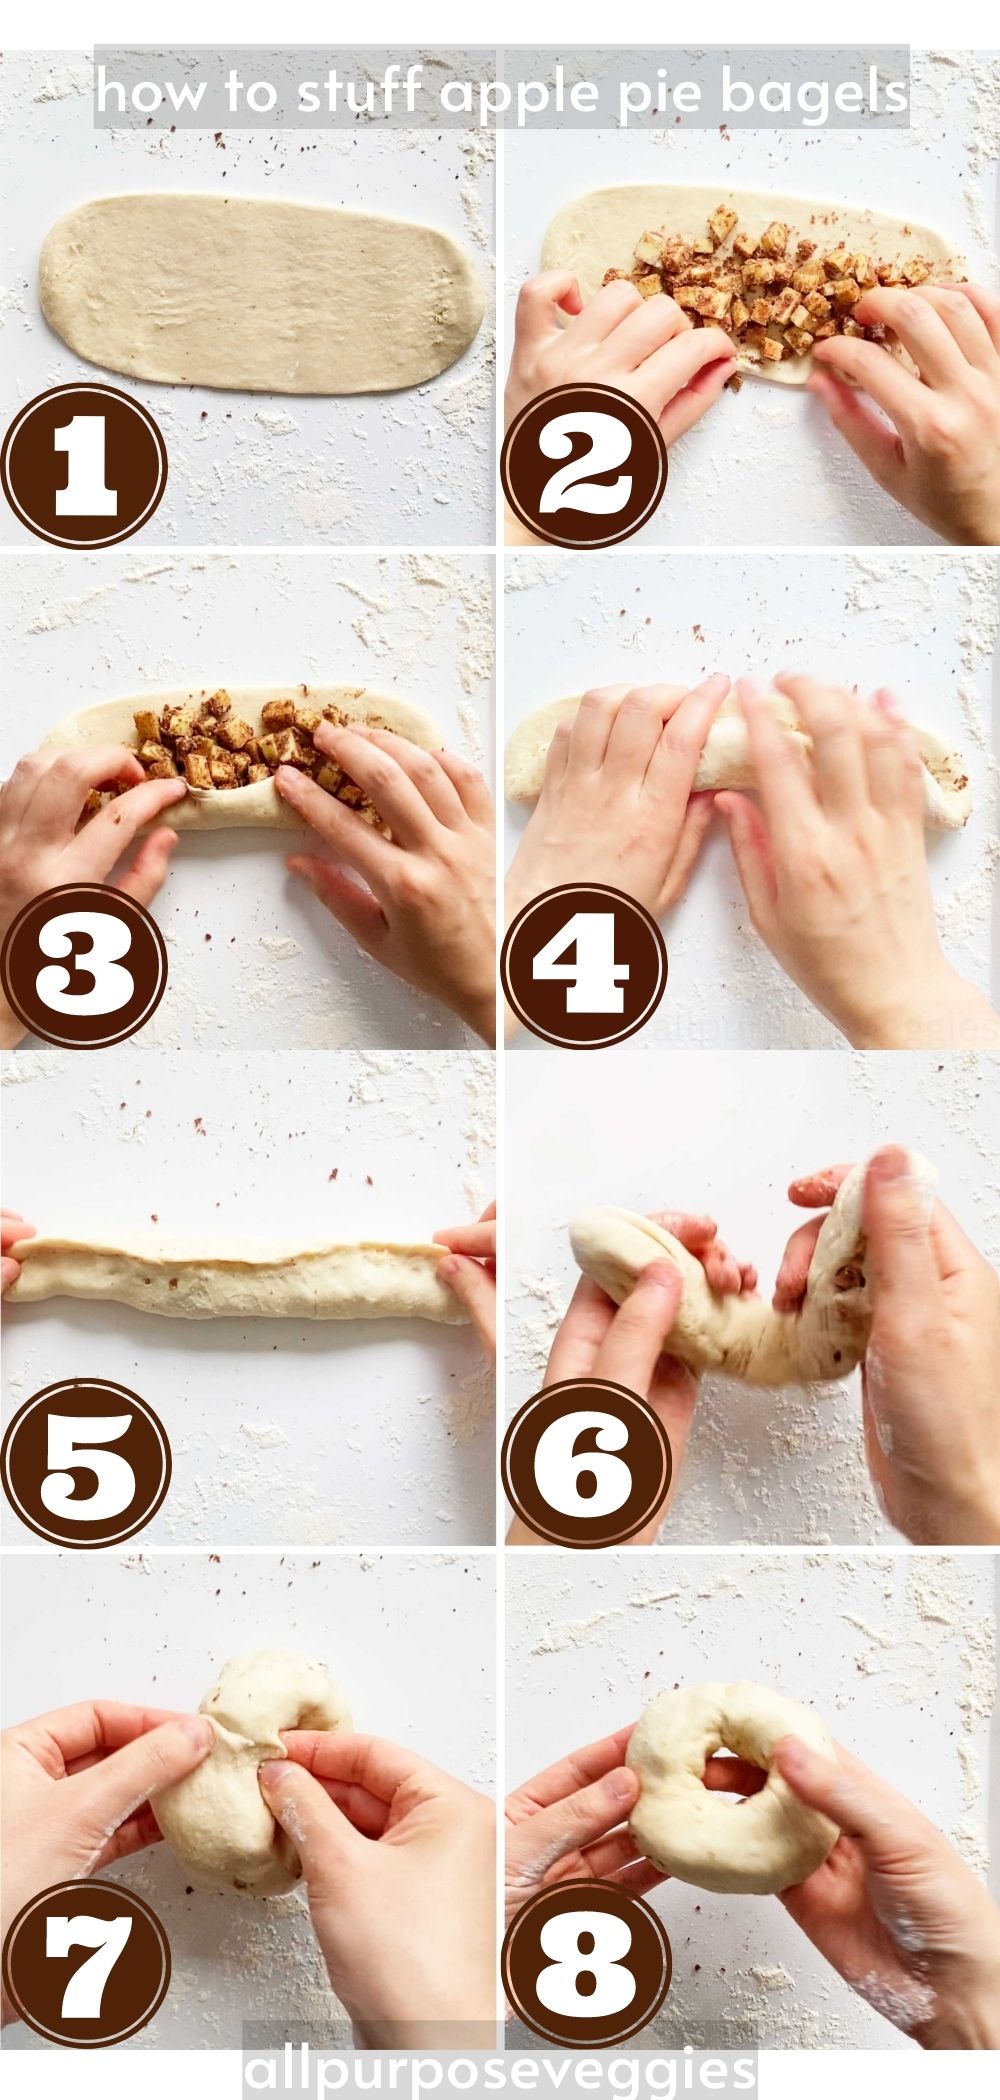 step by step guide - how to stuff apple pie bagels with apple filling